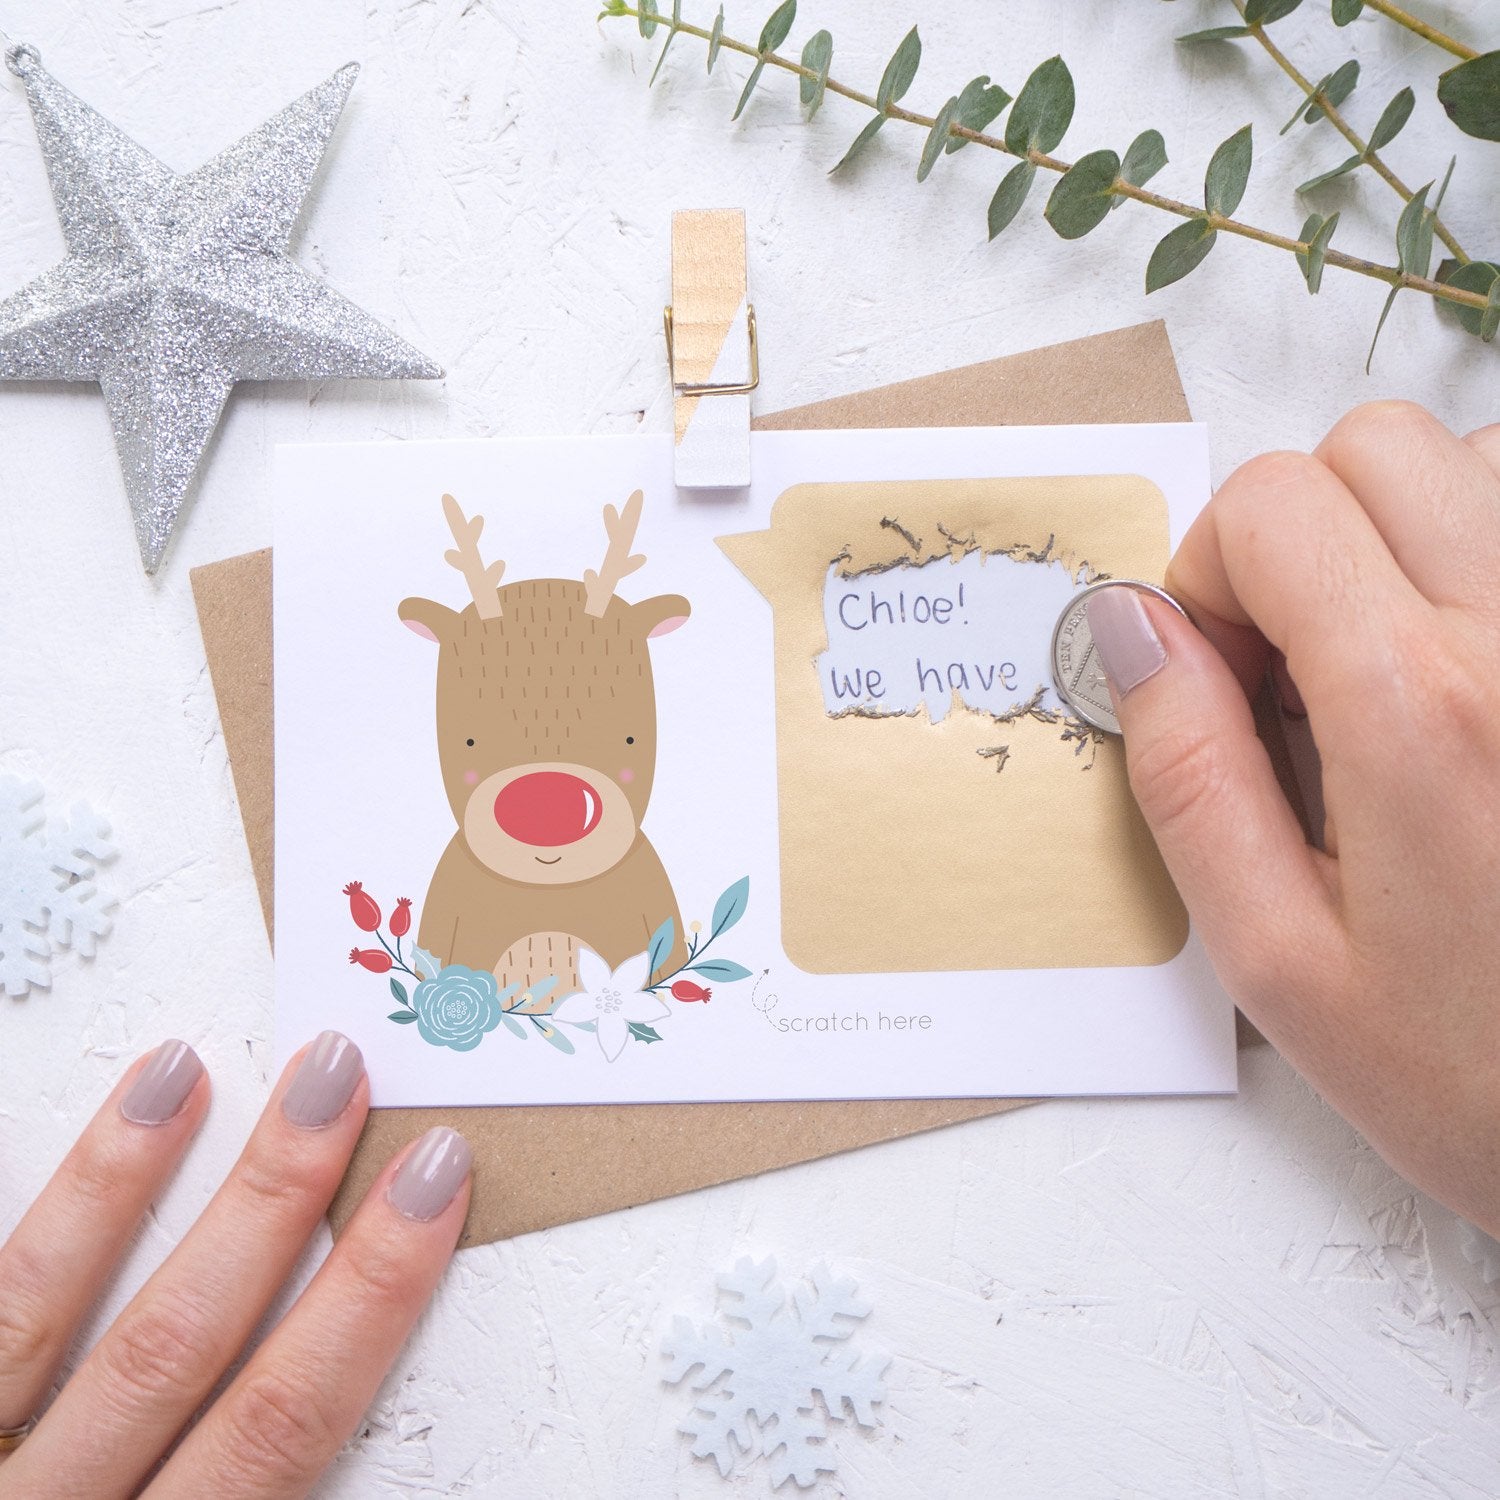 Personalised reindeer secret message Christmas scratch card being scratched off with a coin.